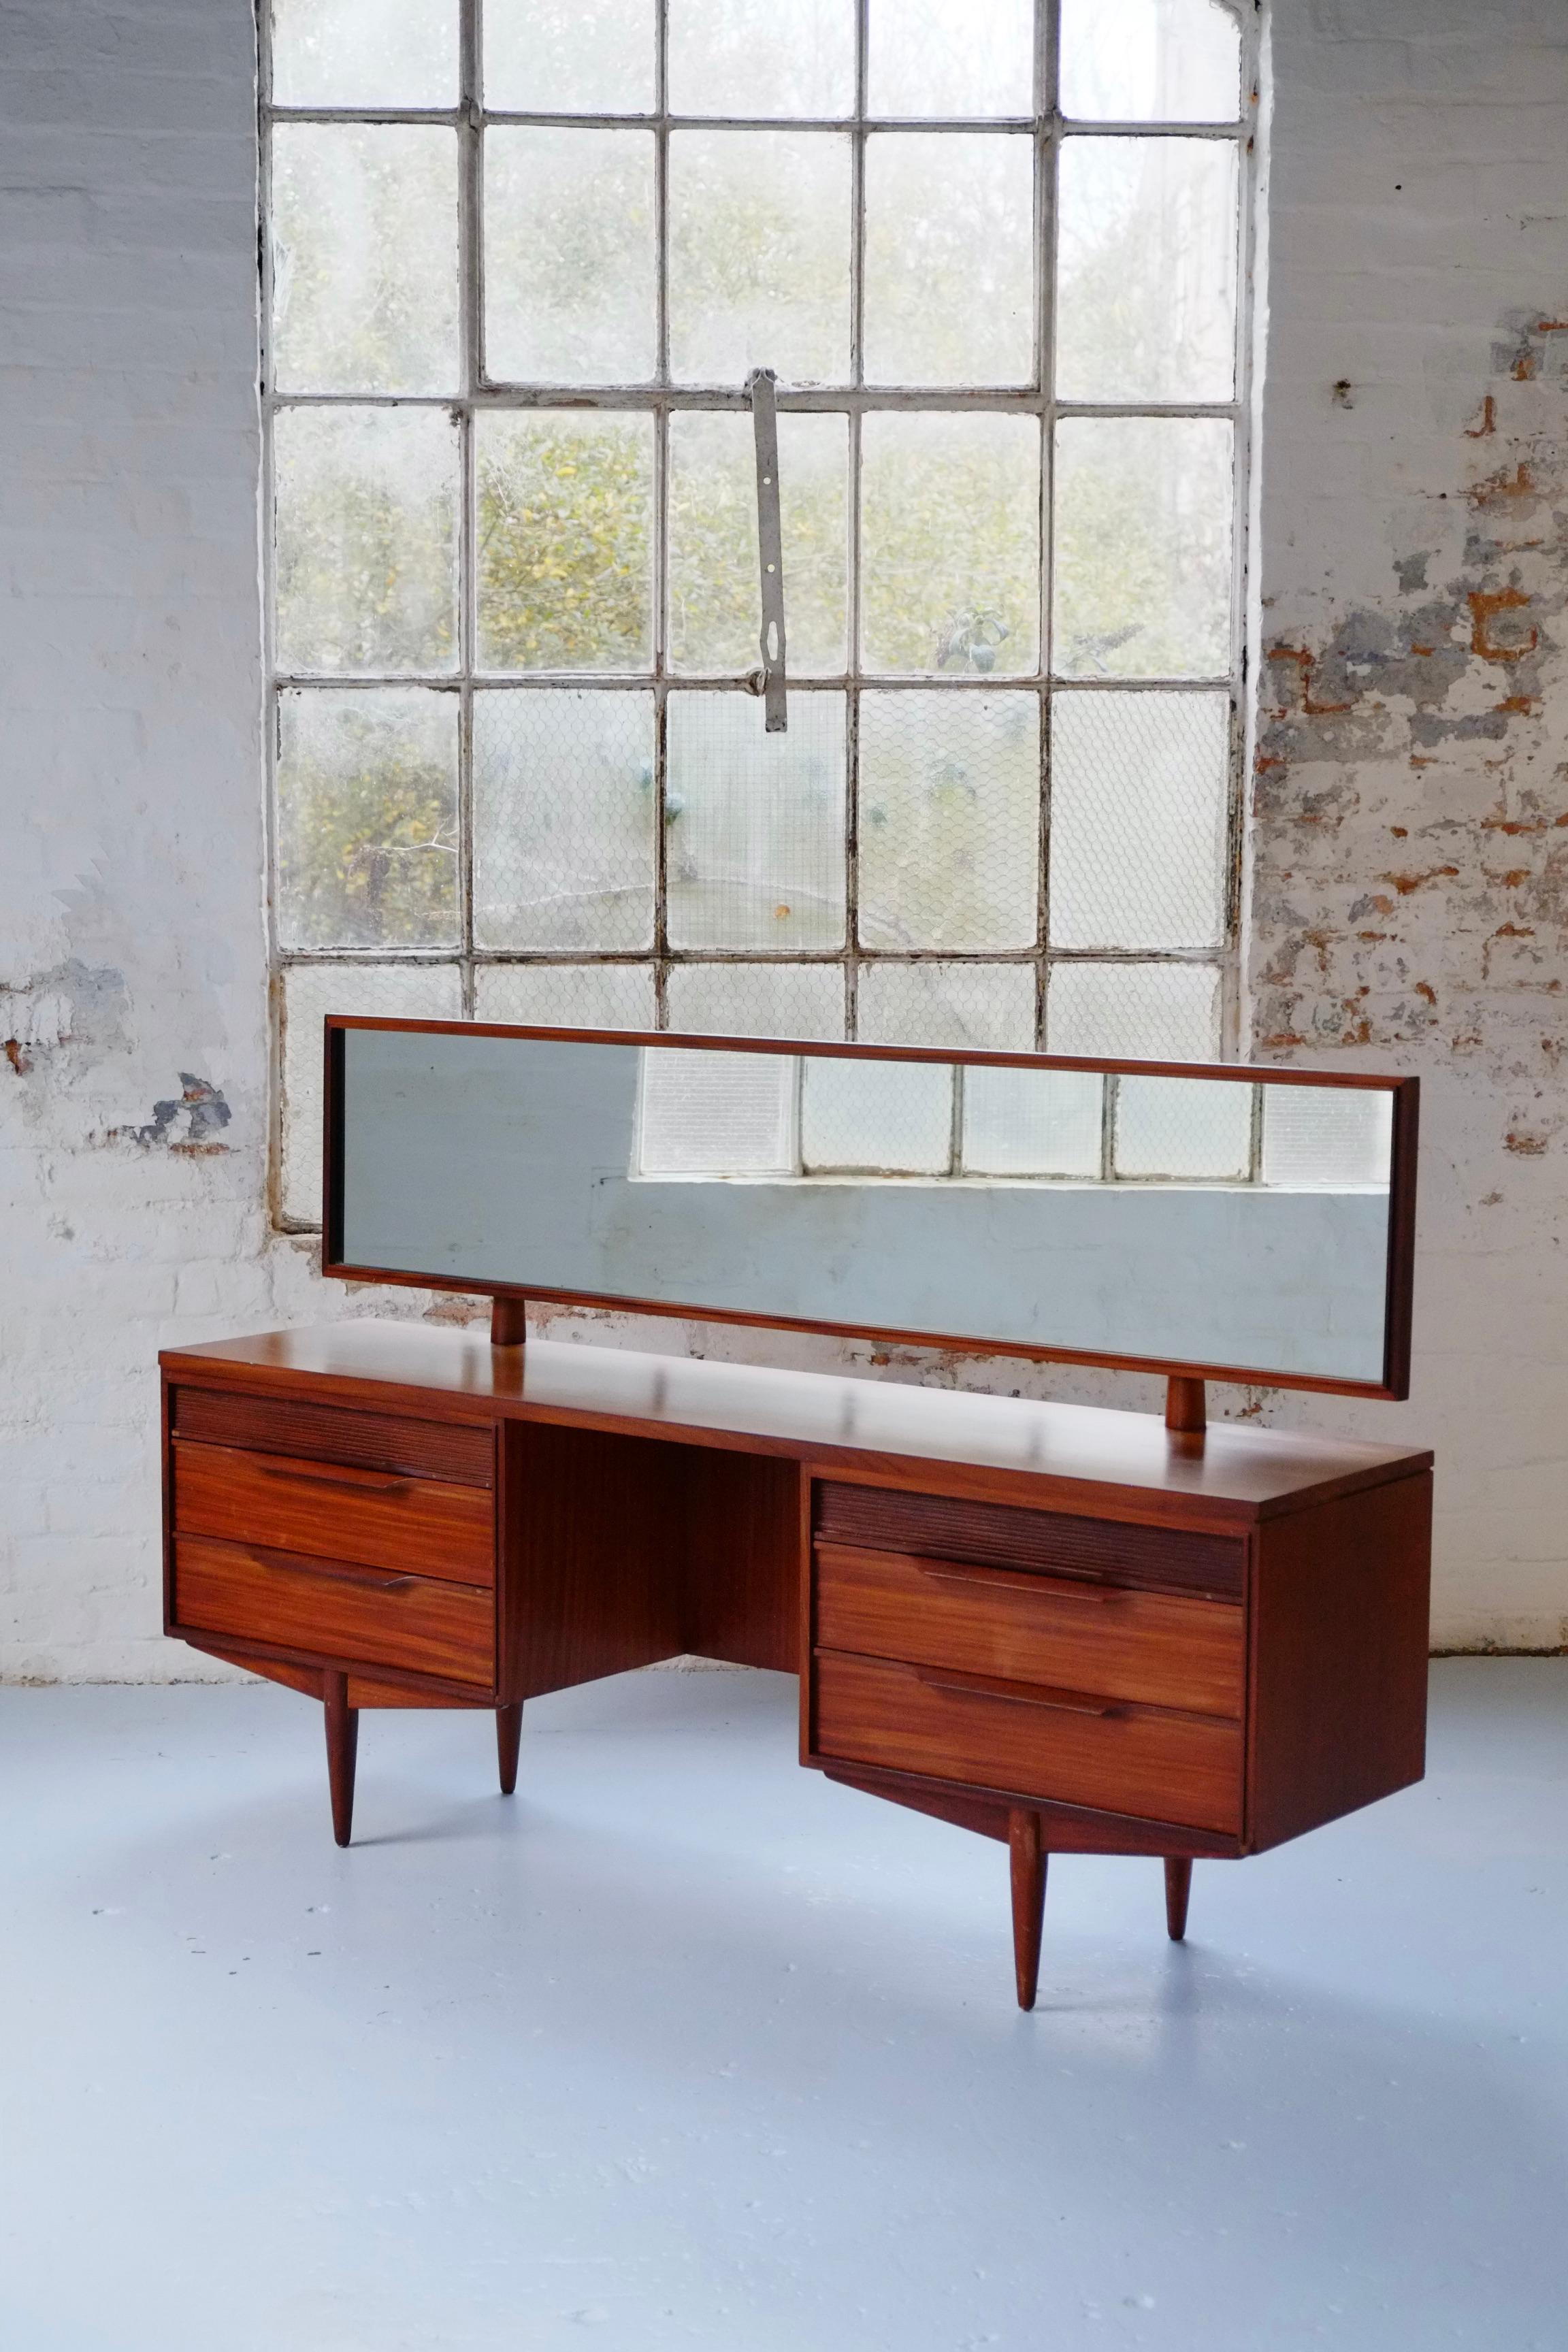 A long elegant mid century dressing table and stool by Arthur Edwards for White and Newton. England C1960. Featured in the 1961 book Contemporary Design in Woodwork. 

This elegant dressing table is beautifully made in two tones of wood - I think